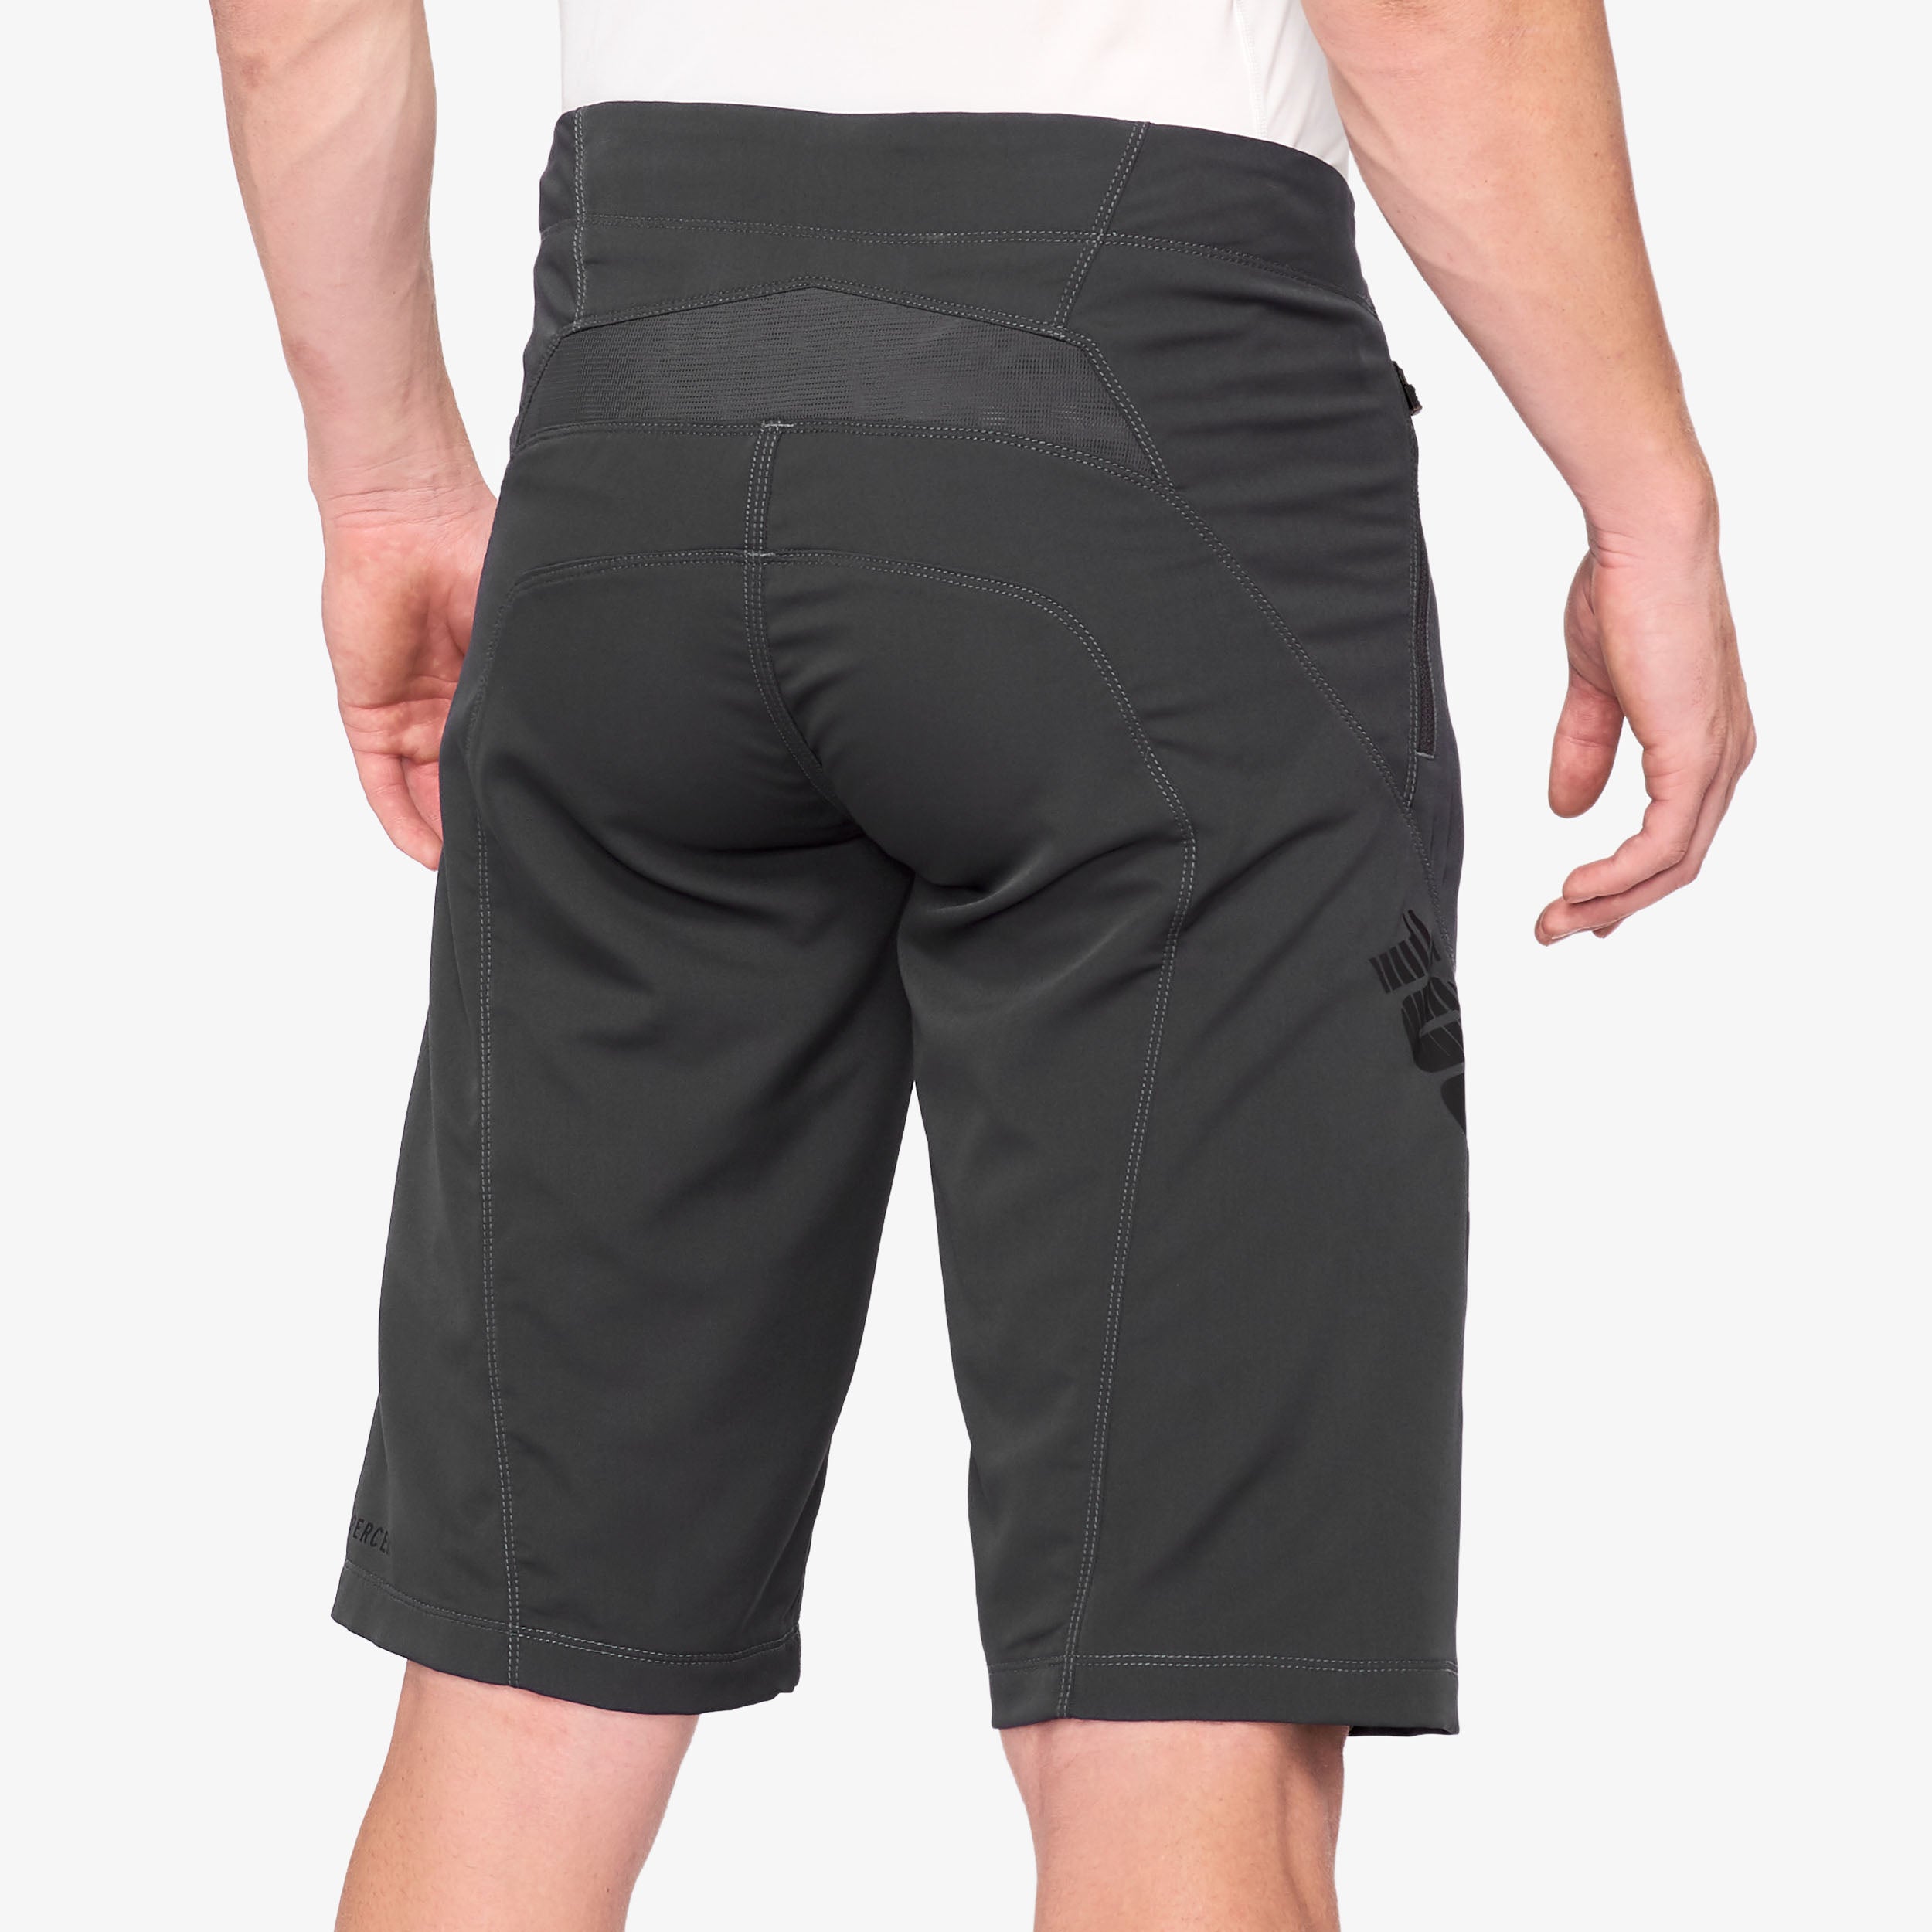 AIRMATIC Shorts Charcoal - Secondary